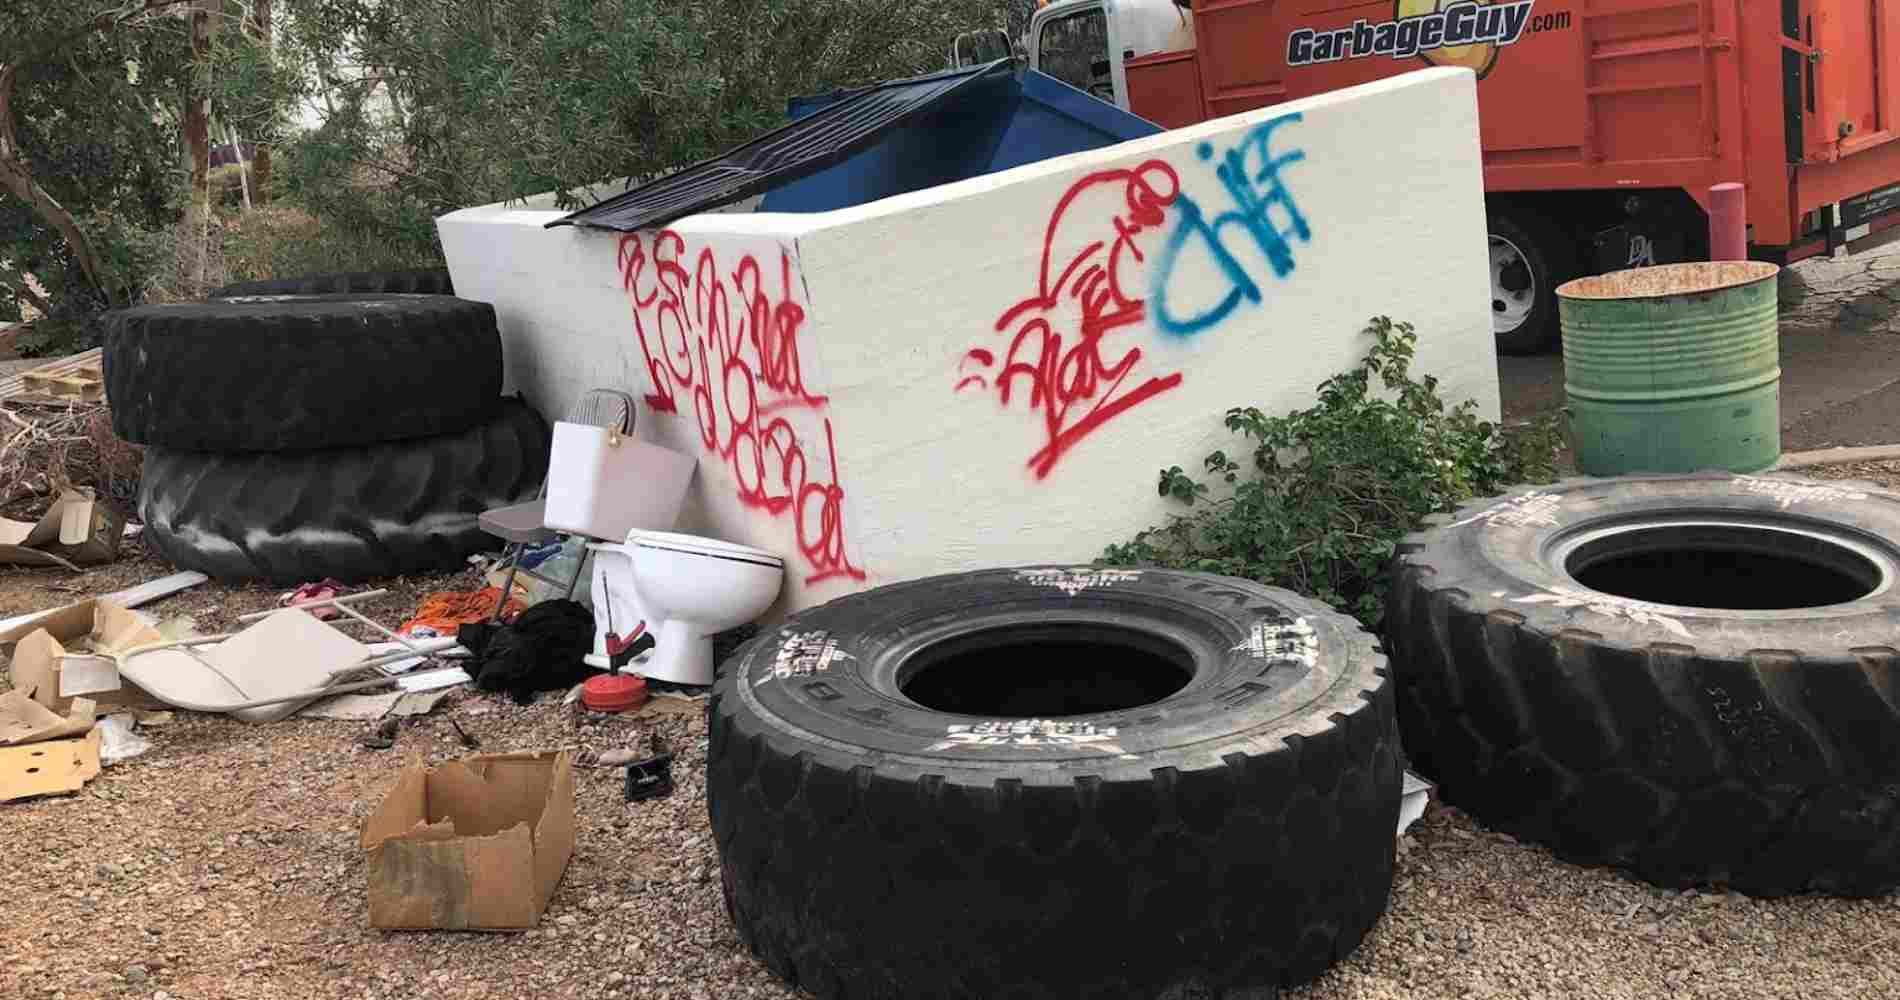 #1 for Tire Disposal in Queen Creek, AZ with Over 1200 5-Star Reviews!